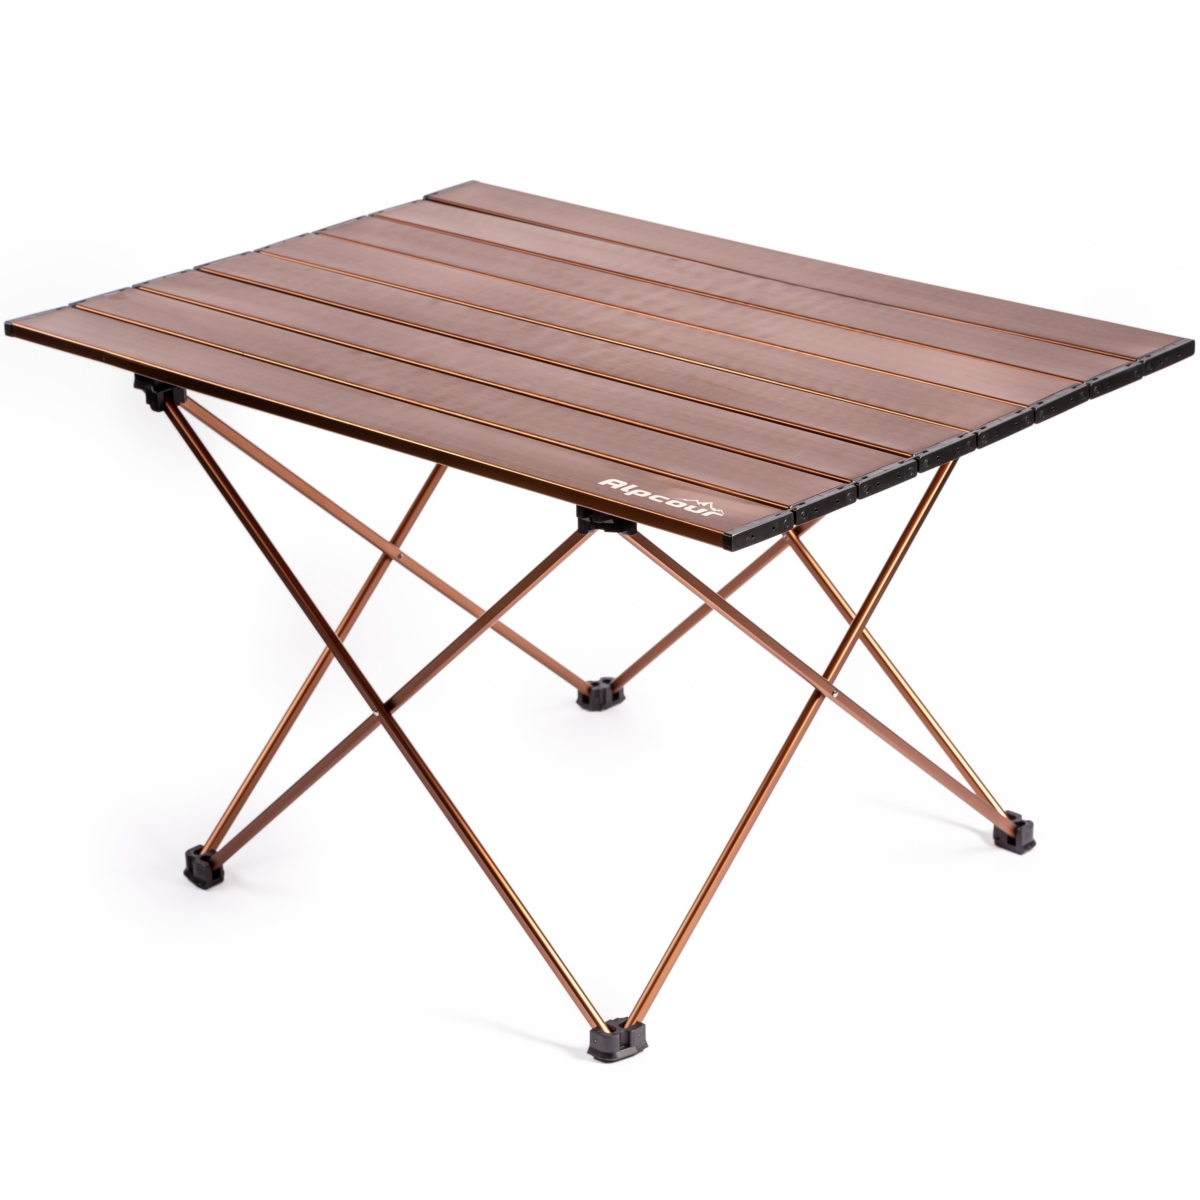 Compact Folding Camping Table - Lightweight Aluminum Portable Side Table - Coffee